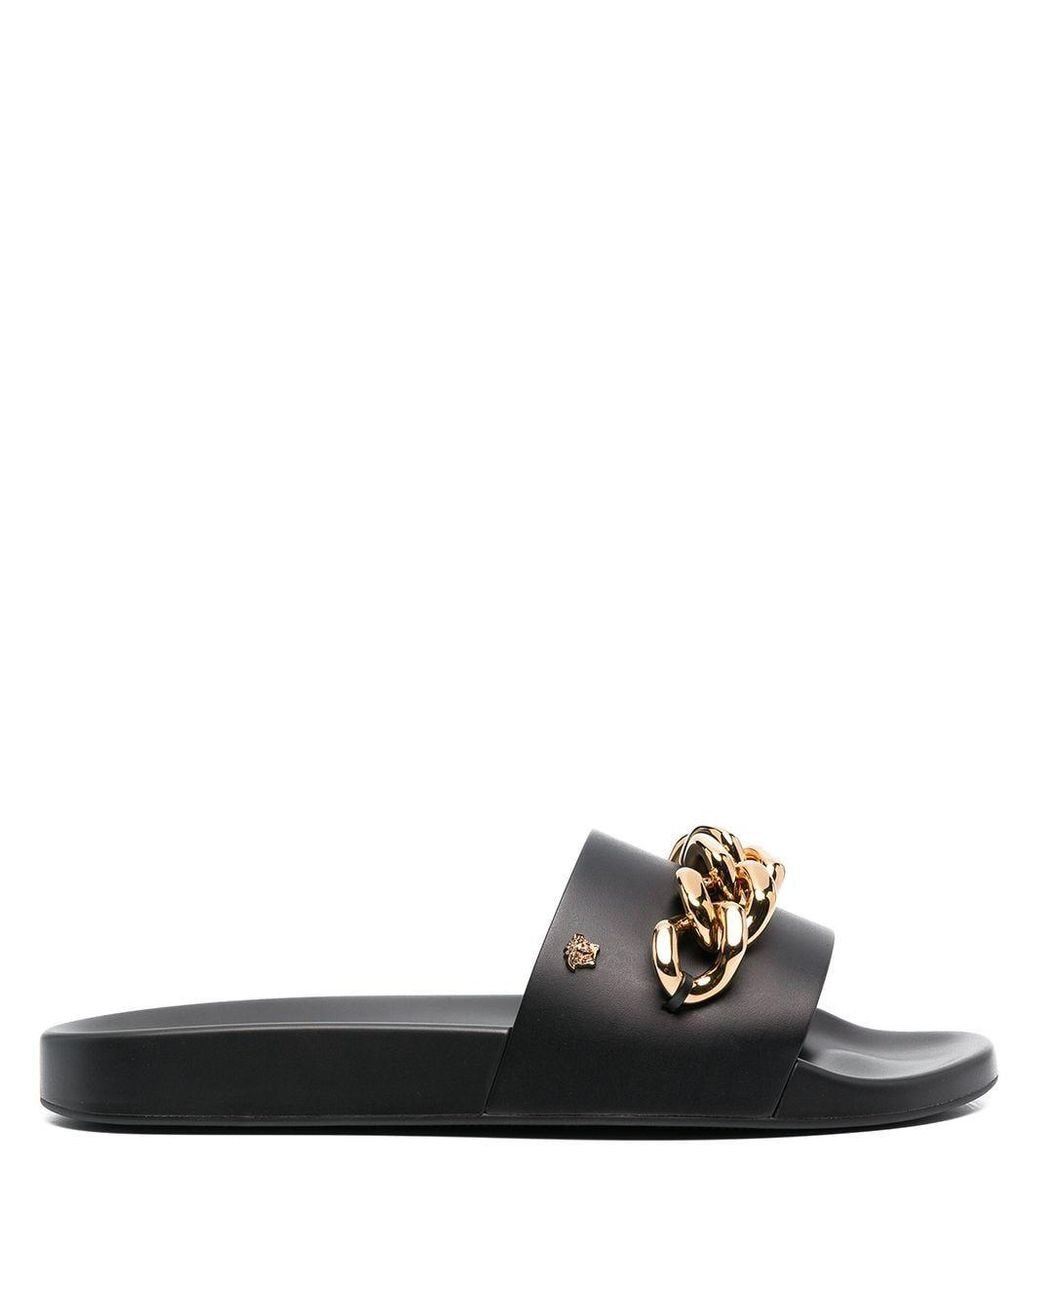 Versace Leather Sandals in Black for Men - Lyst